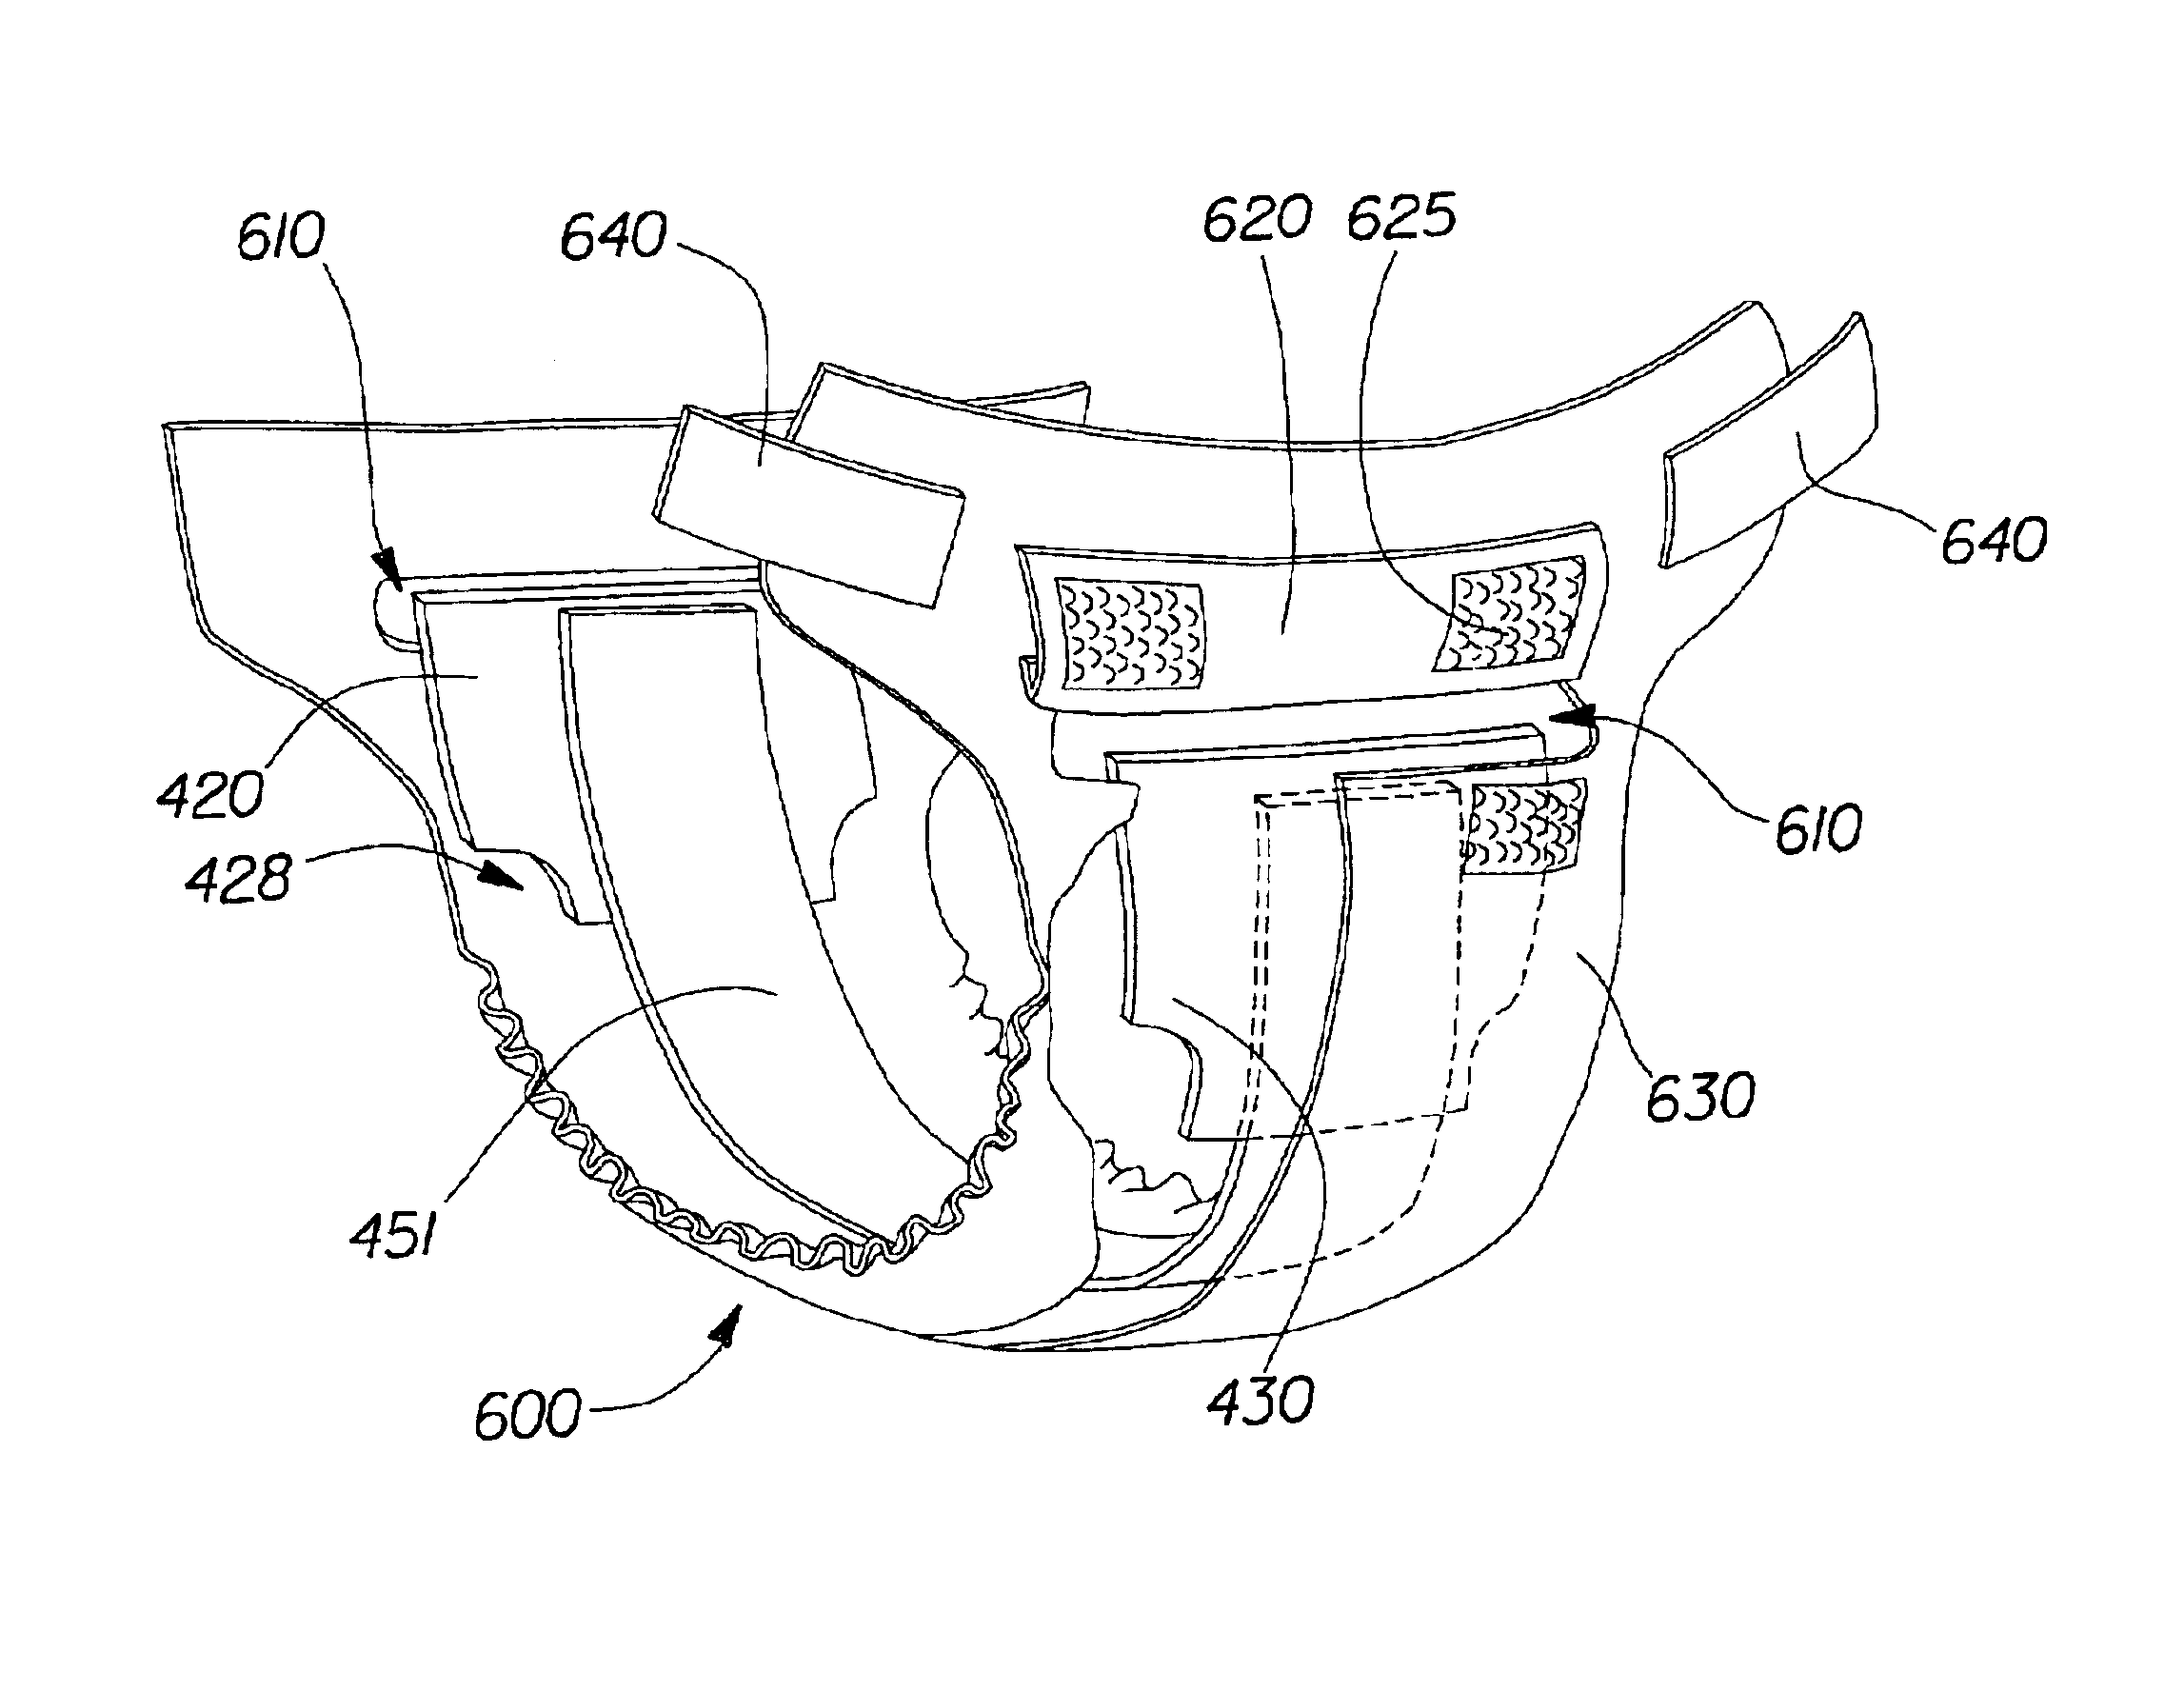 Absorbent articles comprising a material having a high vertical wicking capacity